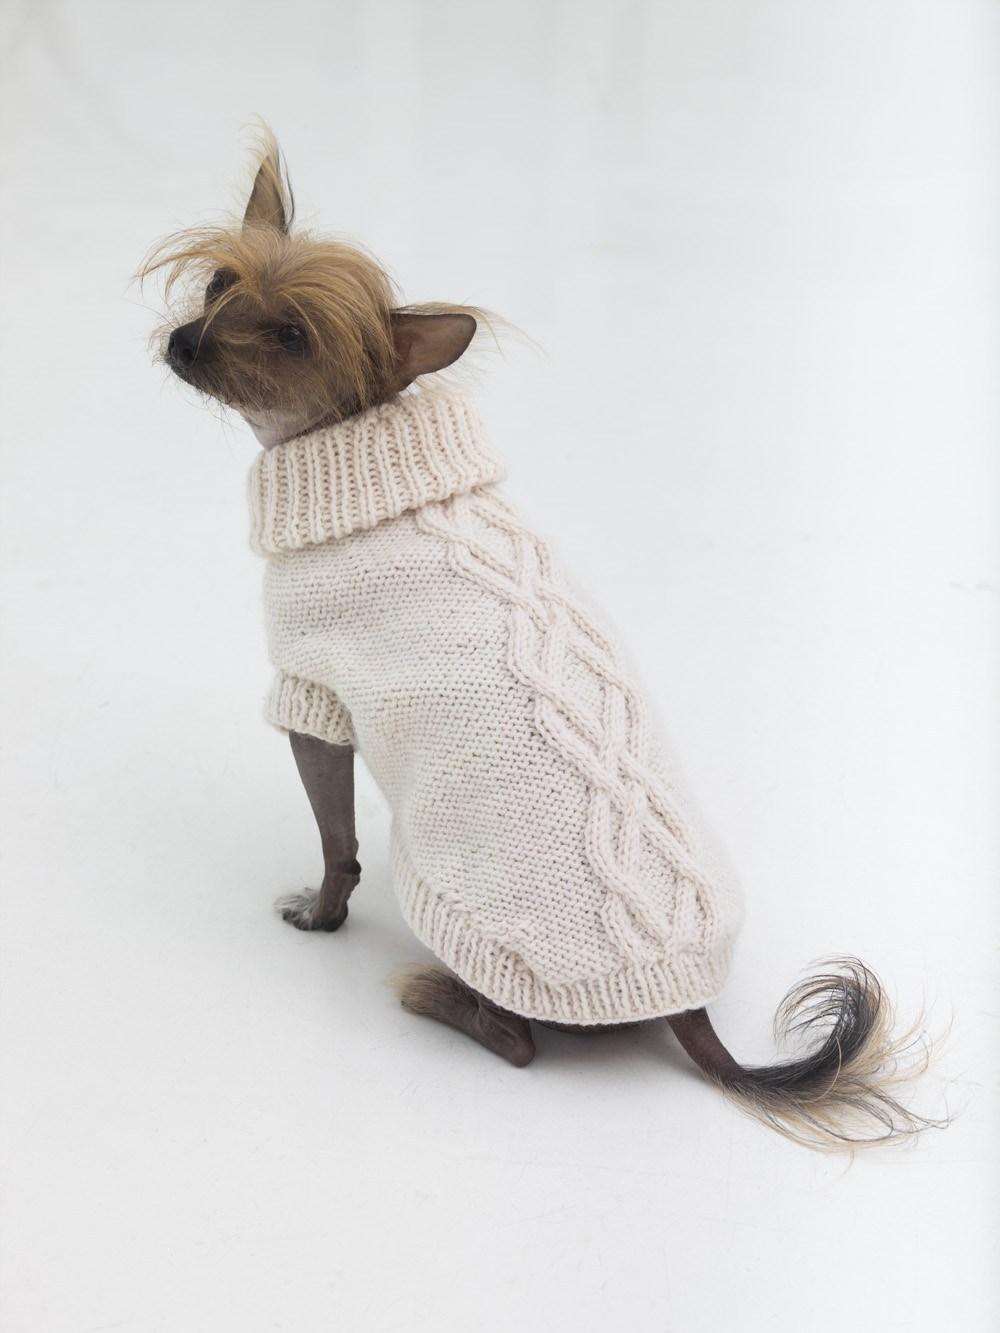 Knitted Dog Coat Pattern 10 Stunning Examples Of Beautiful Fall Dog Sweaters Free Knitting